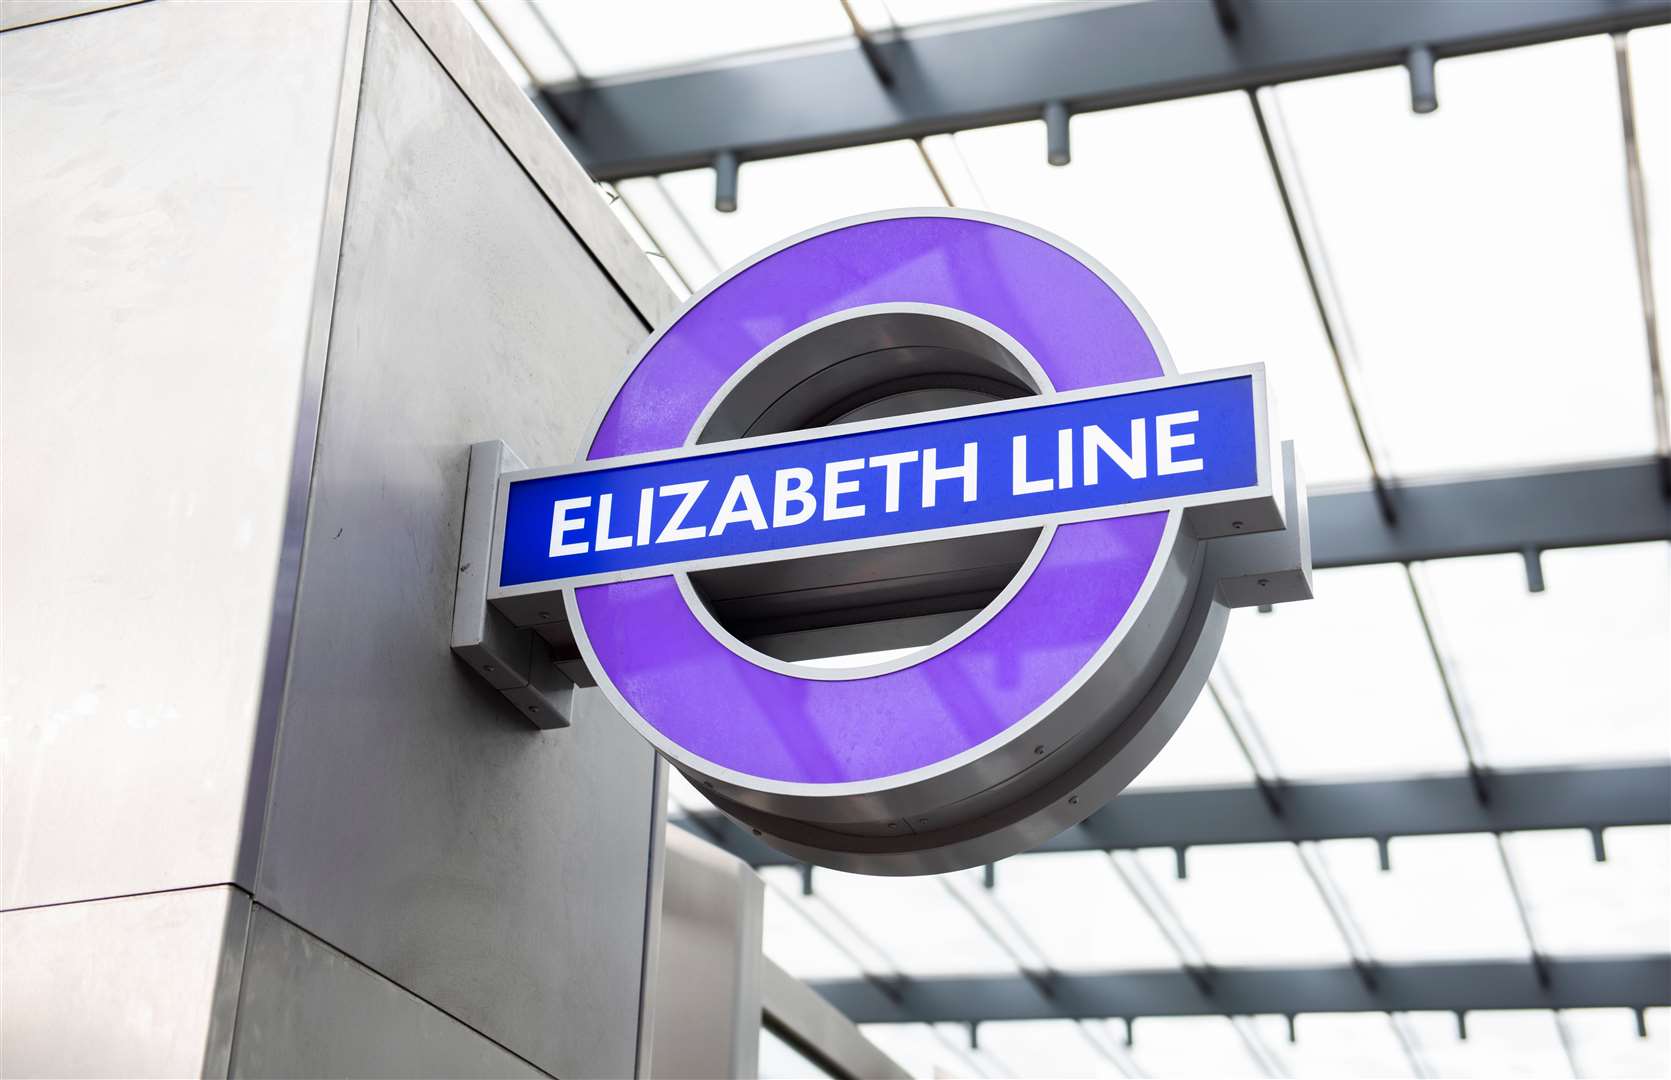 The Elizabeth Line was named after the Queen. Image: TfL.